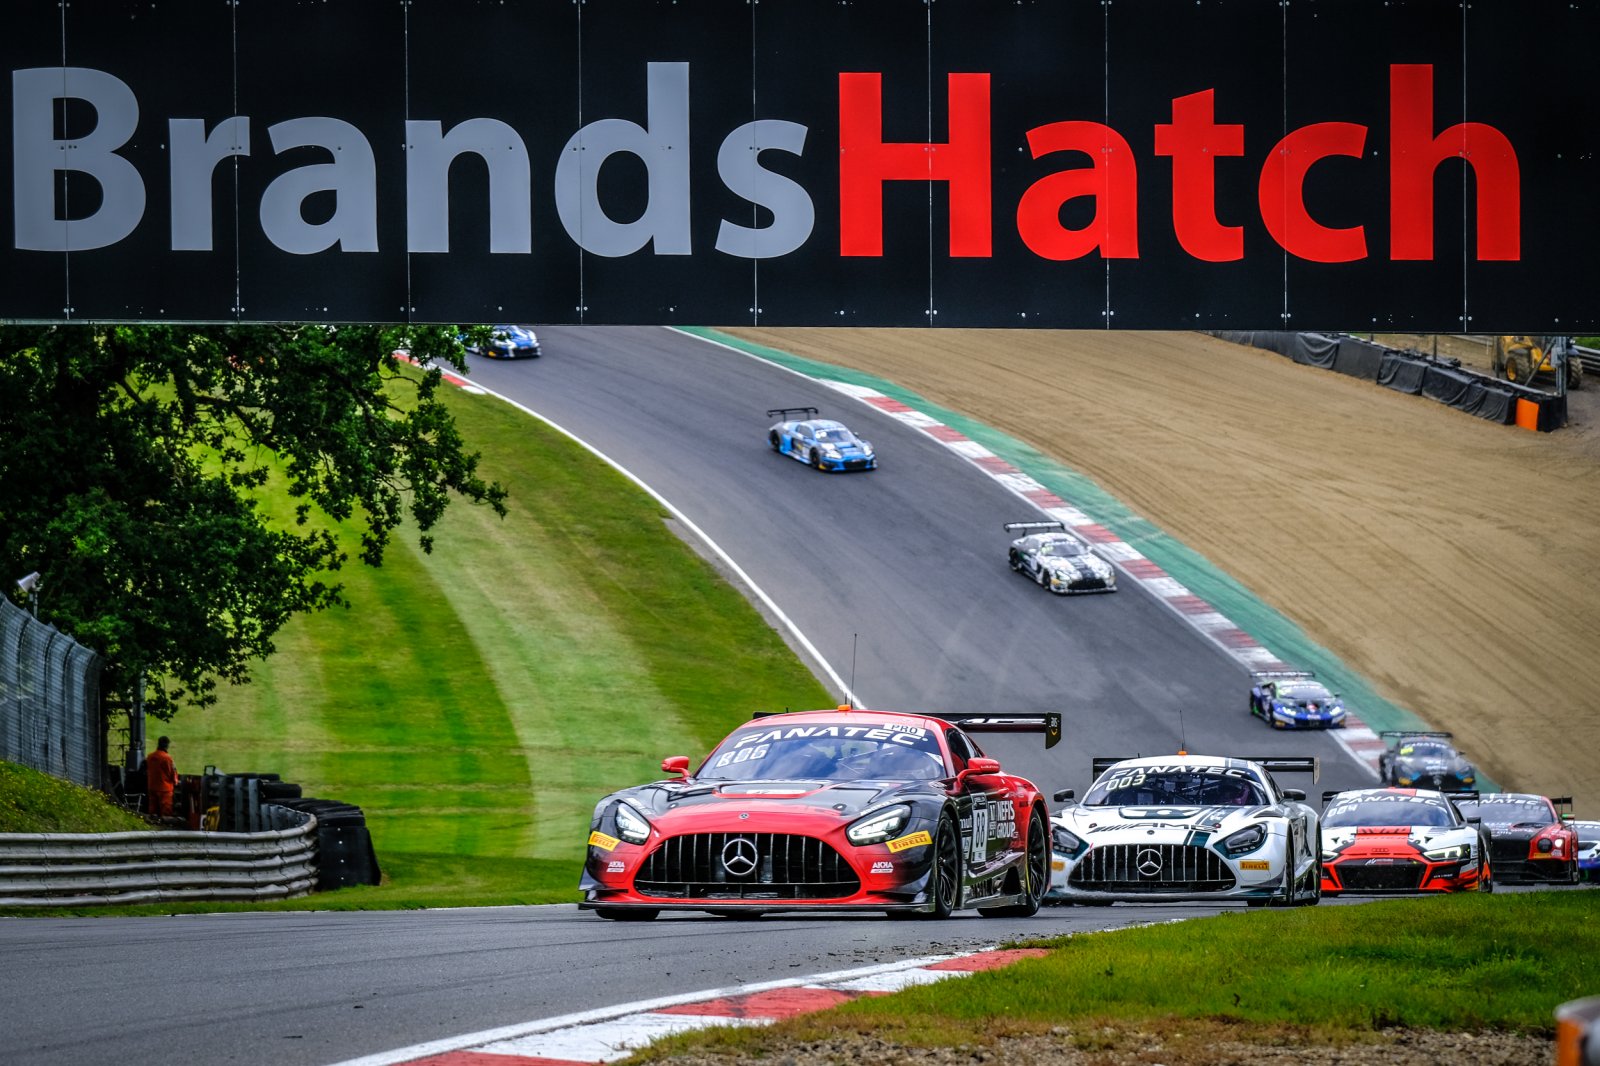 AKKA ASP Mercedes-AMG takes Sprint Cup victory in dramatic finish at Brands Hatch